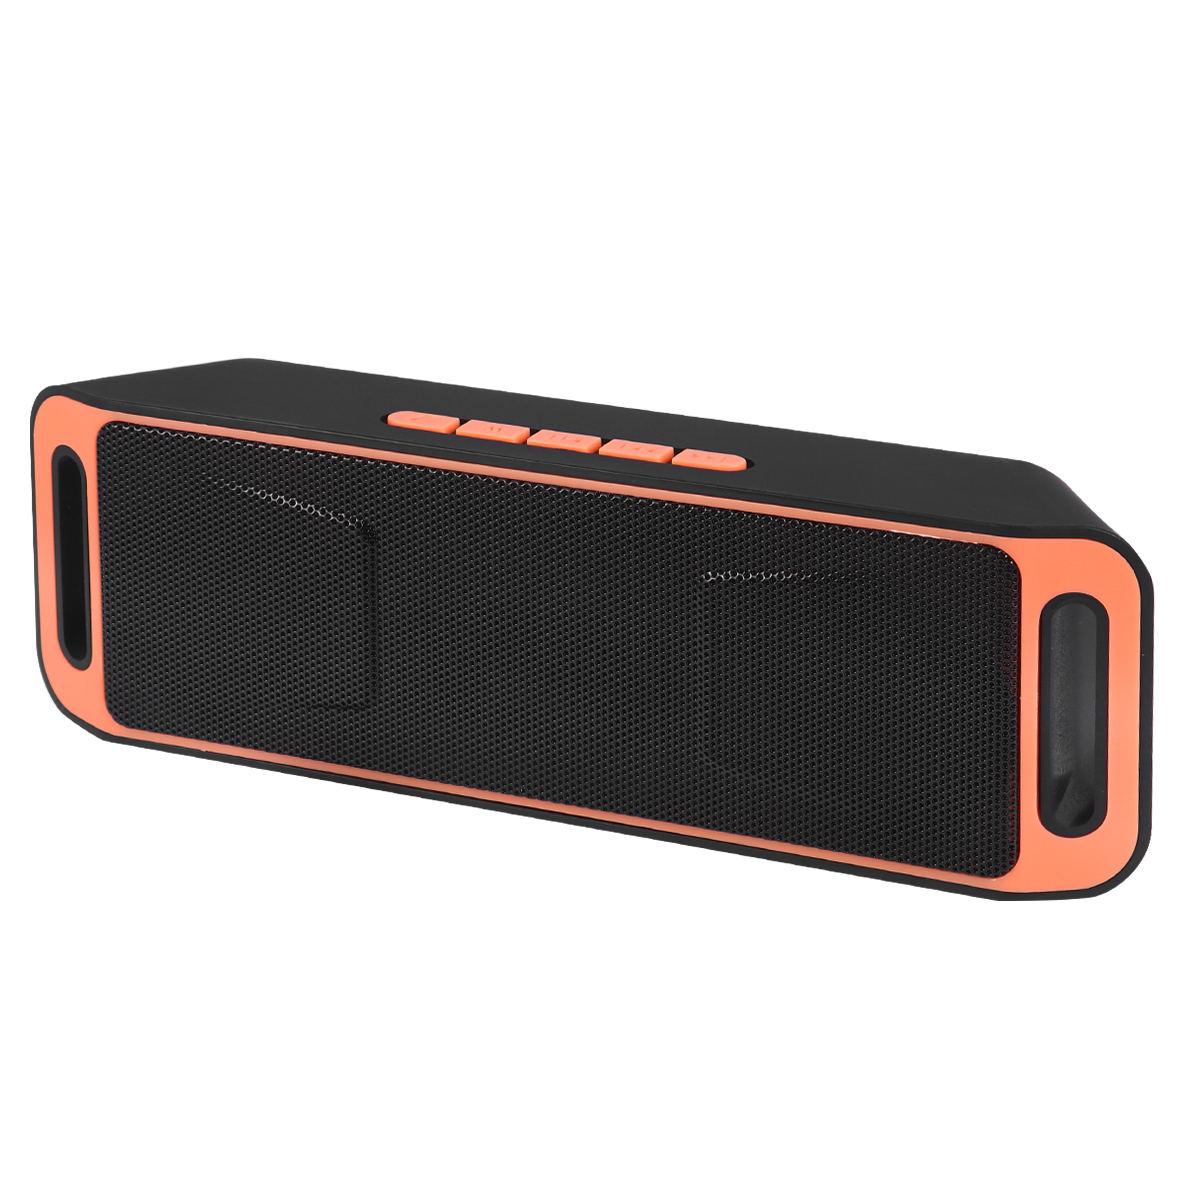 OUNONA Wireless Speaker Mini Portable Computer Speaker Multi-purpose Speaker Outdoor Wireless Speaker Dual Horn Subwoofer Stereo for Outdoor Office Store - image 2 of 5